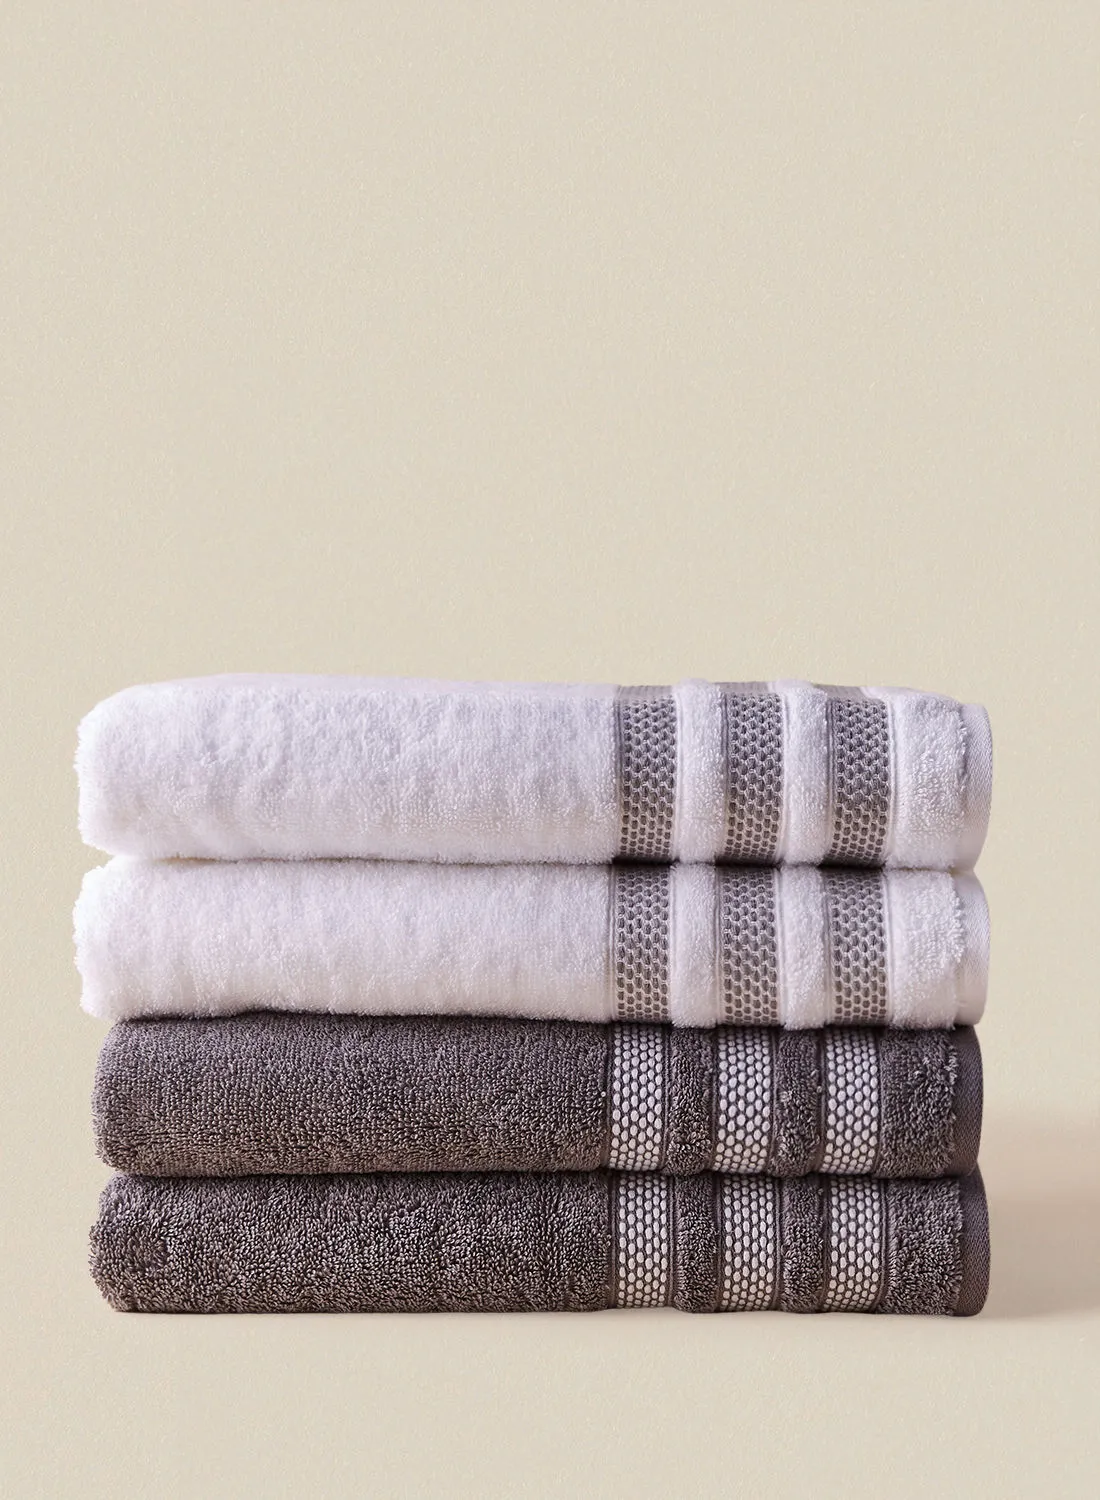 noon east 4 Piece Bathroom Towel Set - 500 GSM 100% Cotton Low Twist - 4 Bath Towel - Multicolor White/Grey Color - Highly Absorbent - Fast Dry